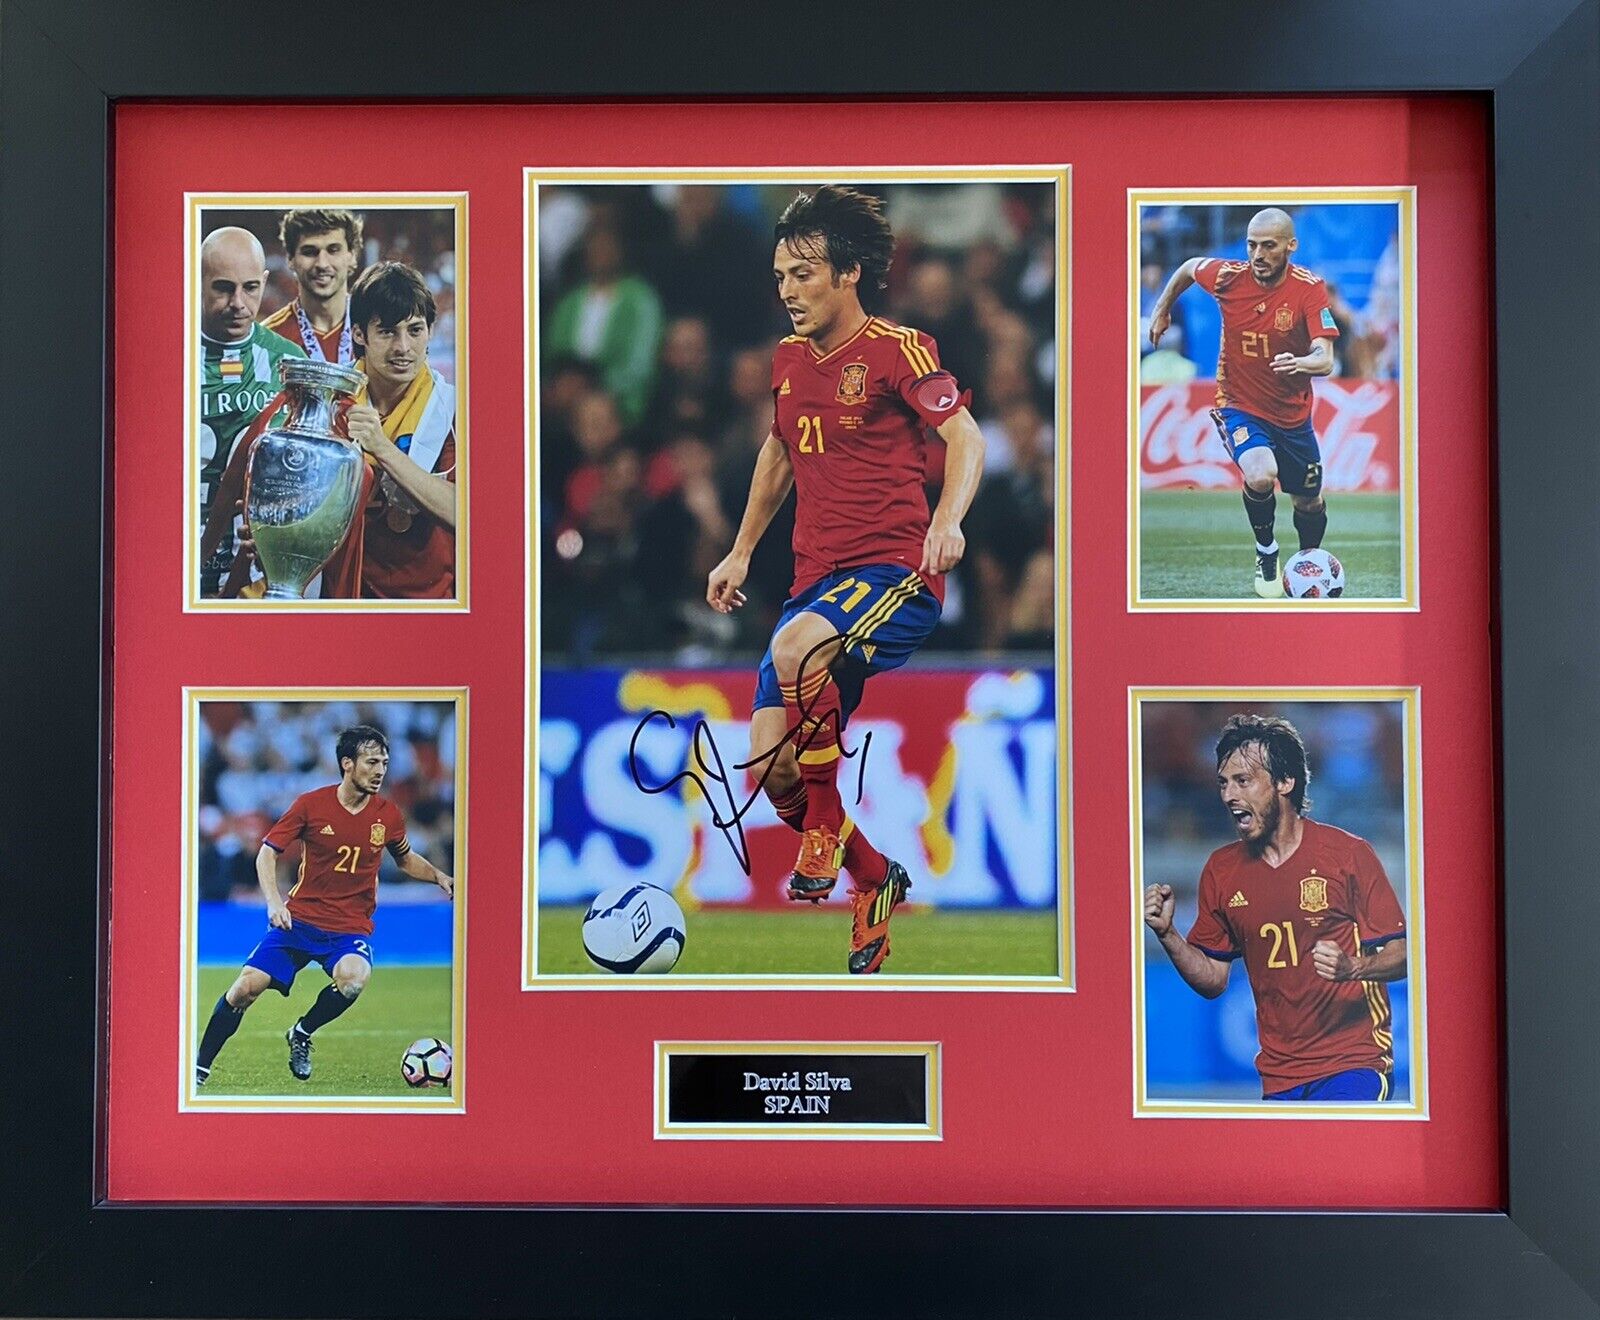 David Silva Hand Signed Spain Photo Poster painting In 20x16 Frame Display, Manchester City